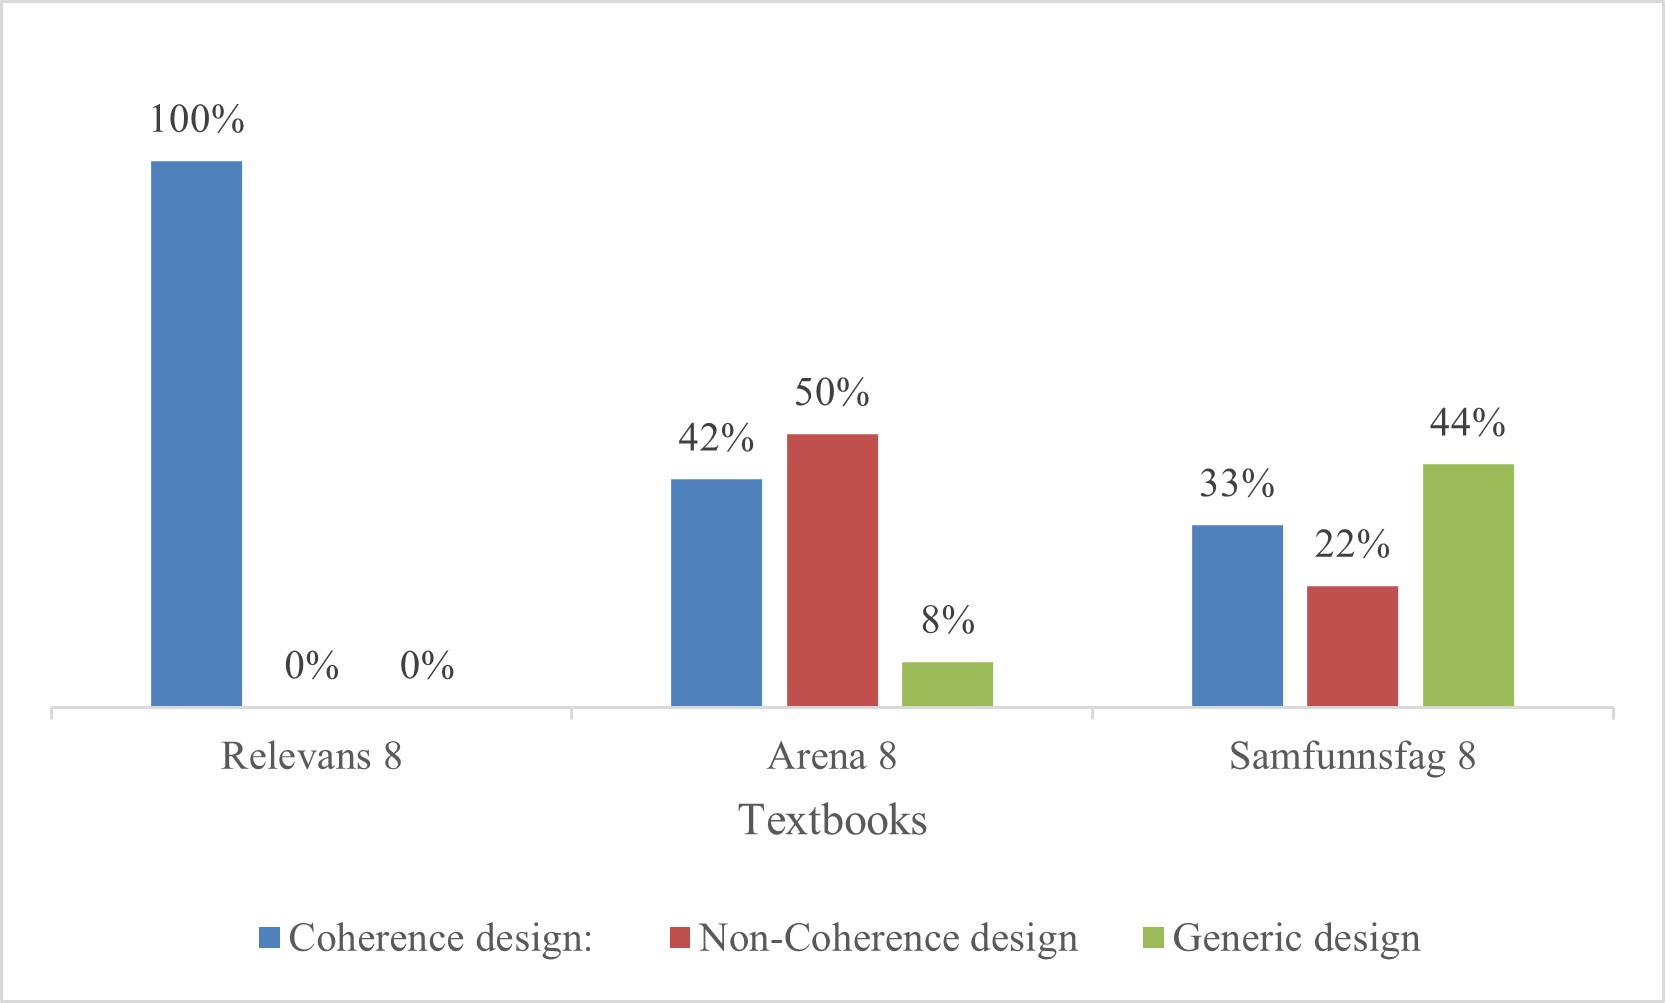 Distribution of coherence design, non-coherence design and generic design in chapters in three textbooks